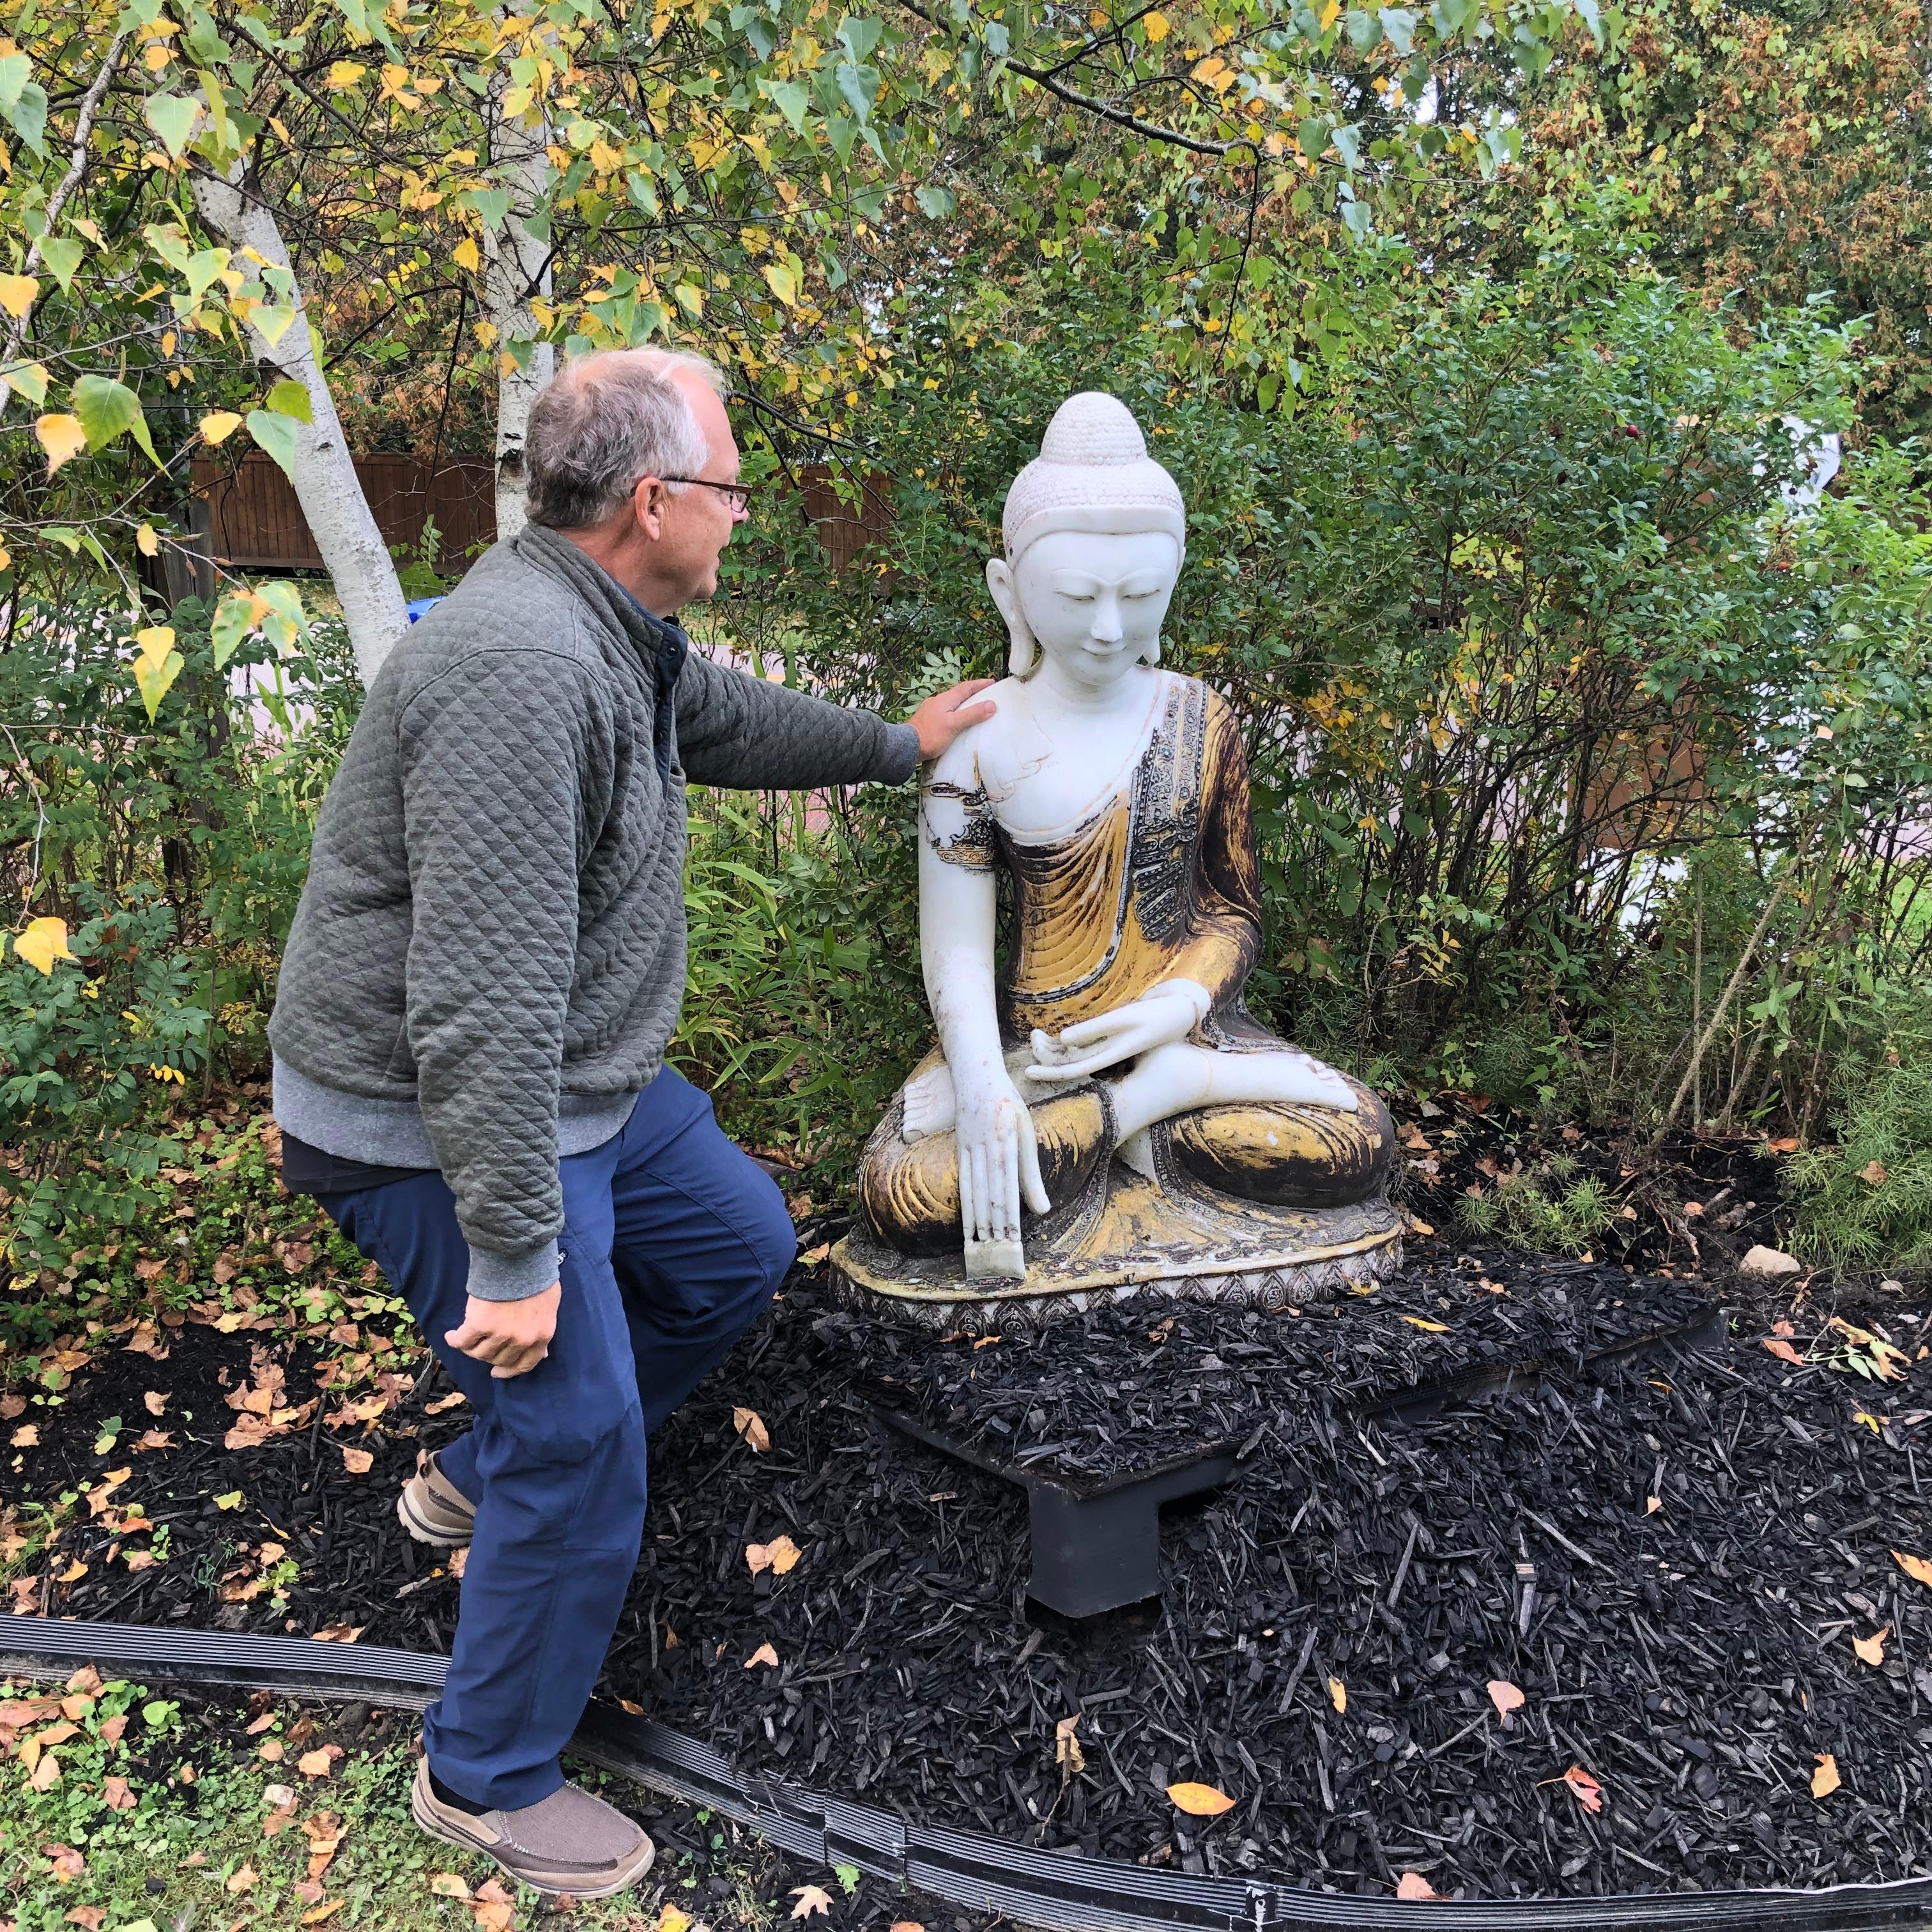 For a Special Garden, 50 Inches Tall

Burma (Myanmar), Mandalay, a monumental hand carved and gold hand lacquered stone seated Buddha with a joyful face dating to the early 20th century.

This beautiful Buddha sculpture will bring serenity and